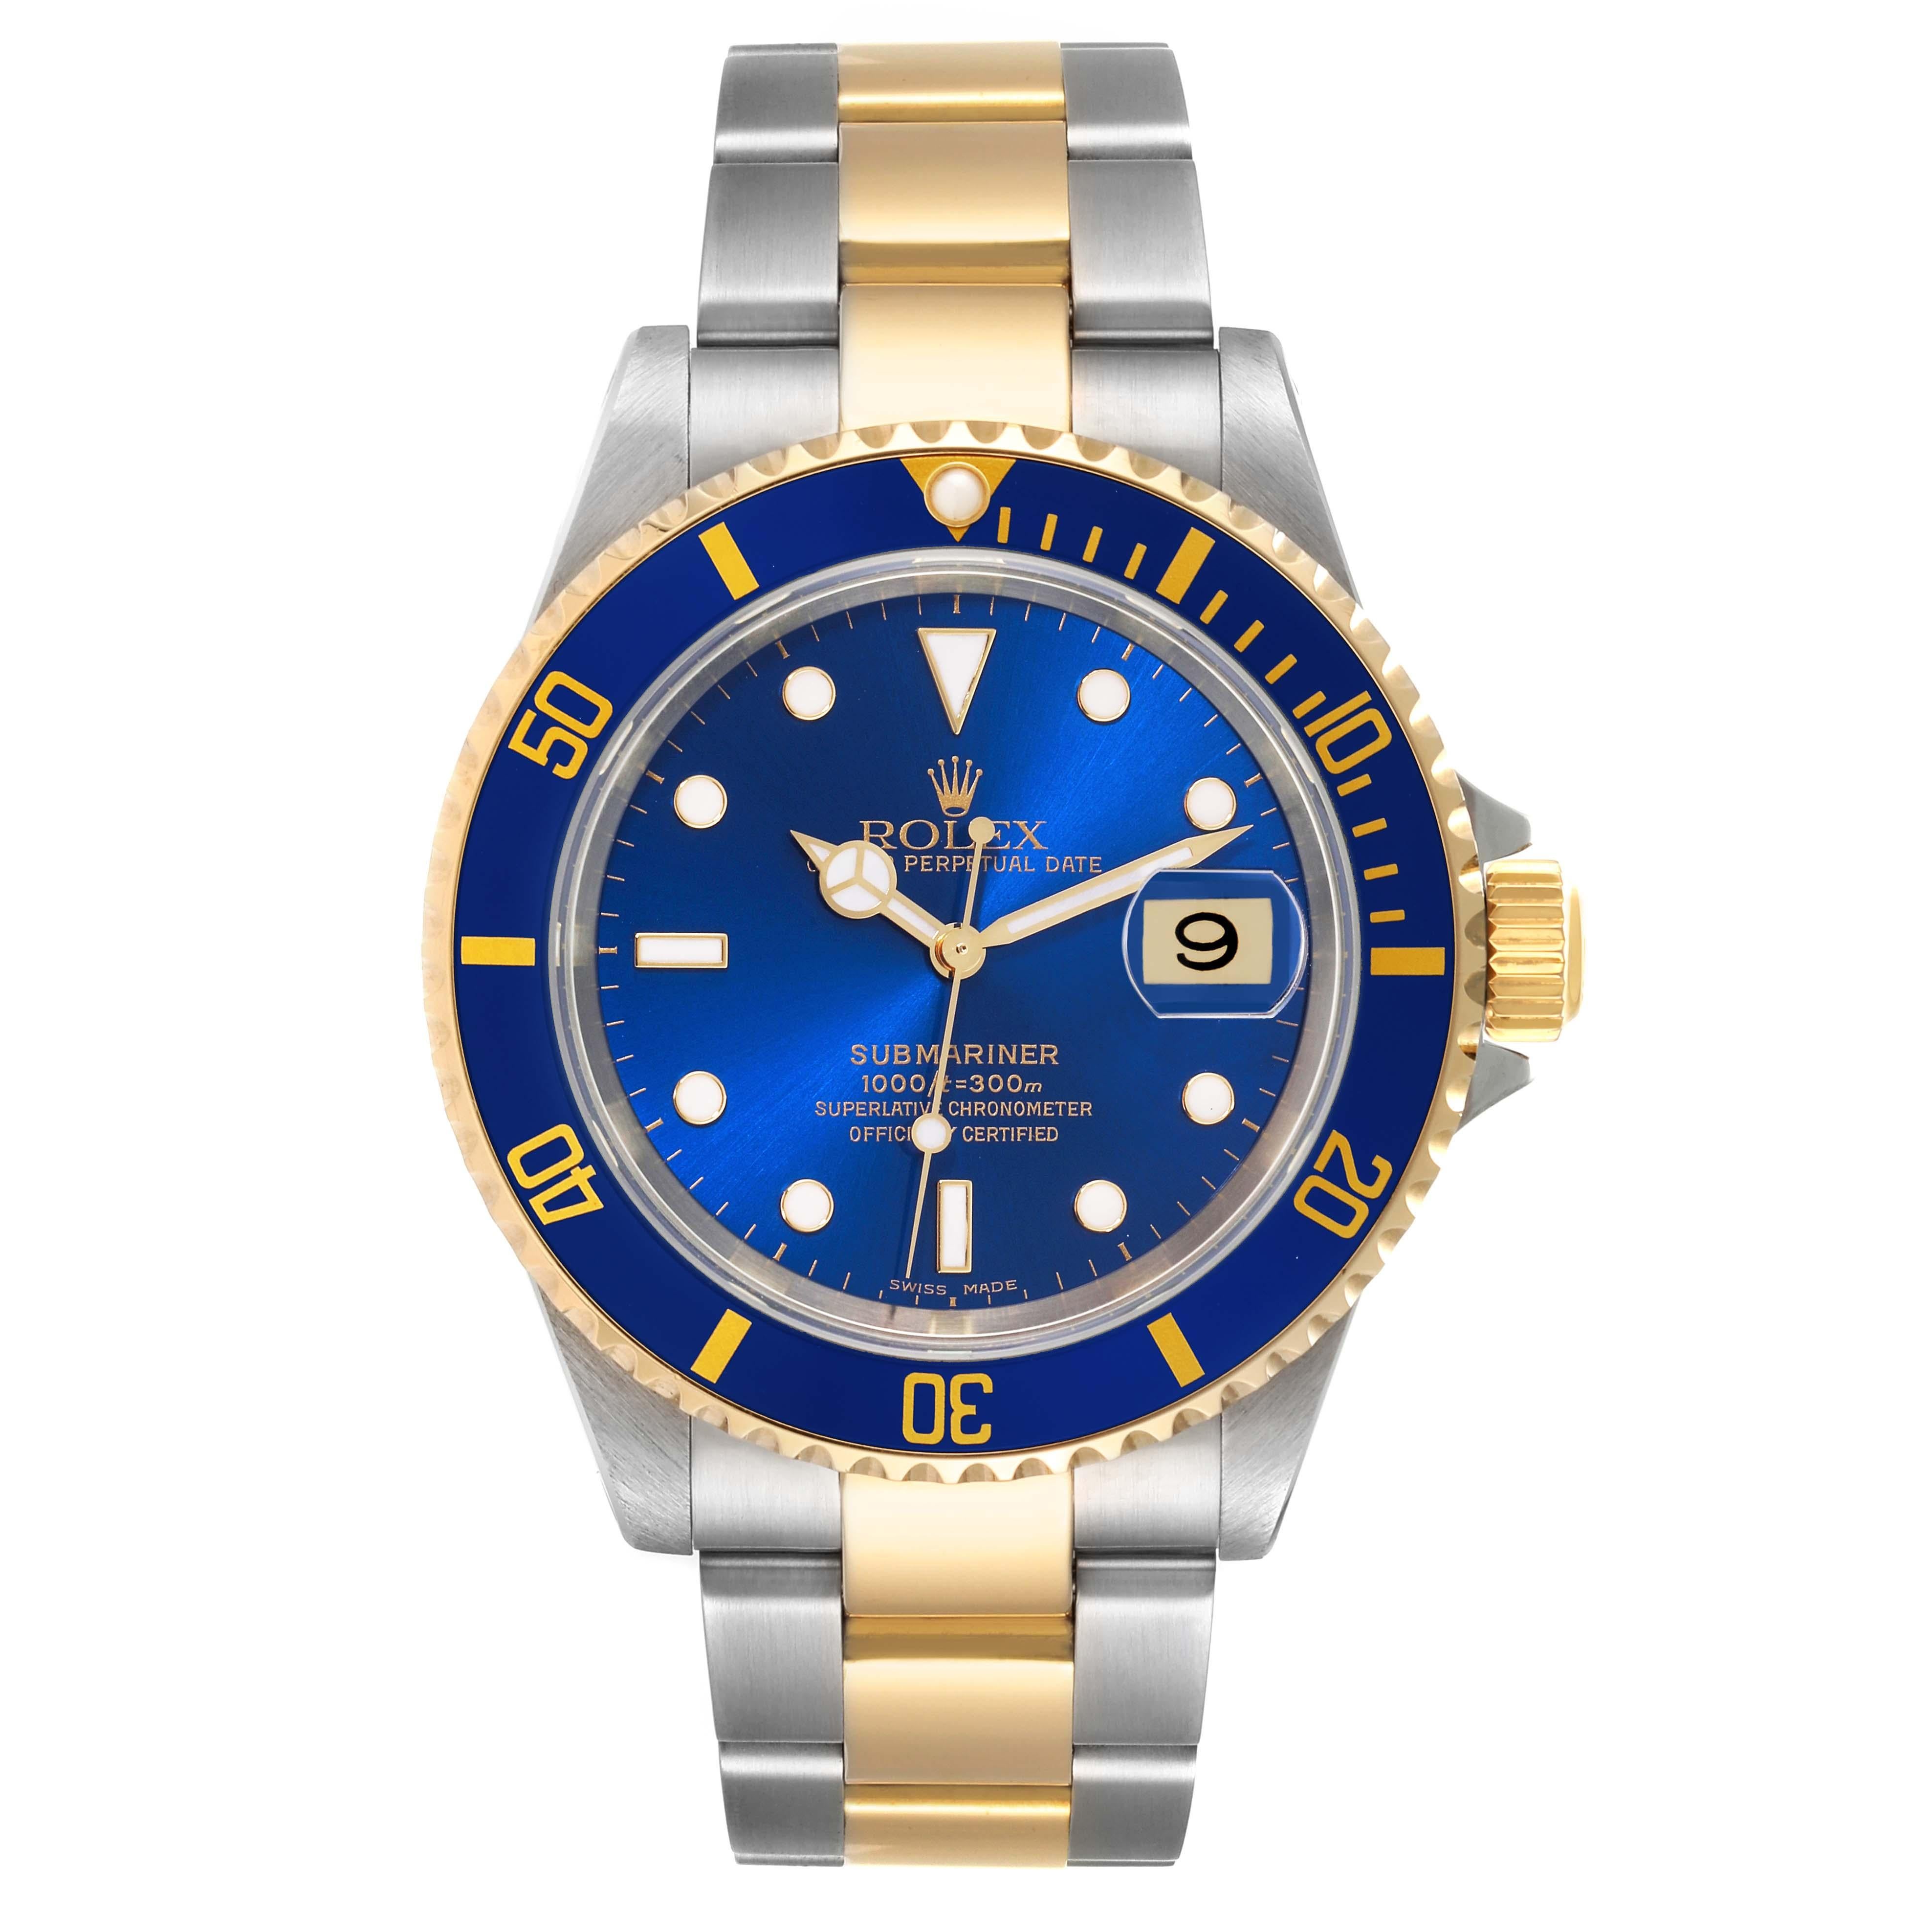 Rolex Submariner Blue Dial Steel Yellow Gold Mens Watch 16613 Box Papers. Officially certified chronometer automatic self-winding movement. Stainless steel and 18k yellow gold case 40 mm in diameter. Rolex logo on the crown. Blue insert special